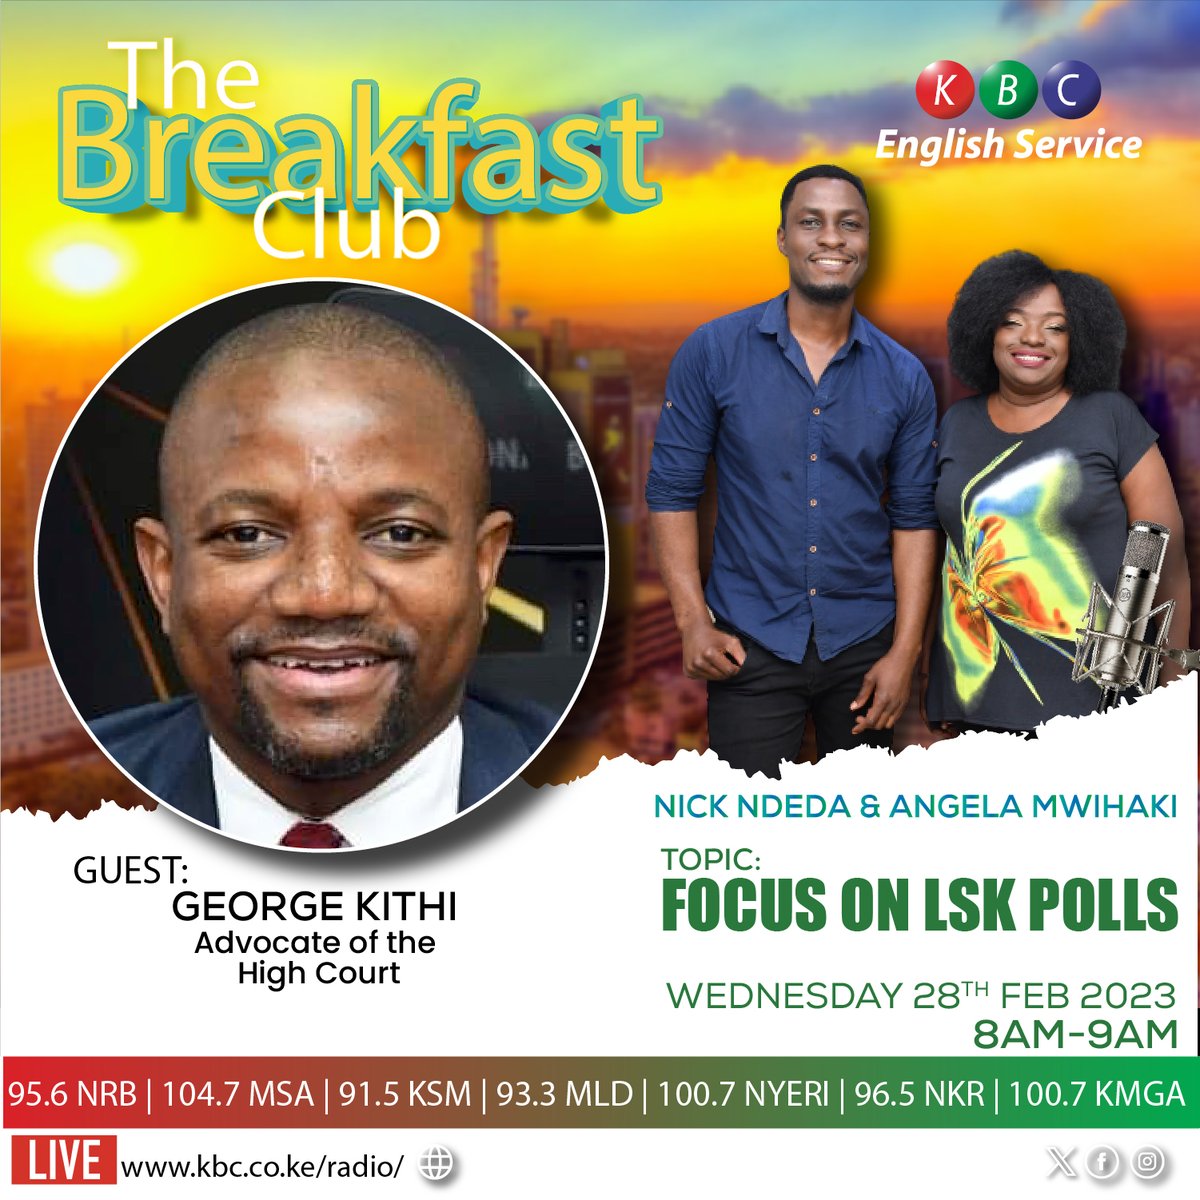 What are your preferred qualities for LSK office holder? Wednesday starts here on the Breakfast Club from 0500HRS to 1000HRS with Nick Ndeda & Angela Mwihaki GOOD MORNING! Listen live: kbc.co.ke/radio/ ^PMN #BreakfastClubKBC @NickNdeda | @angelamwihaki